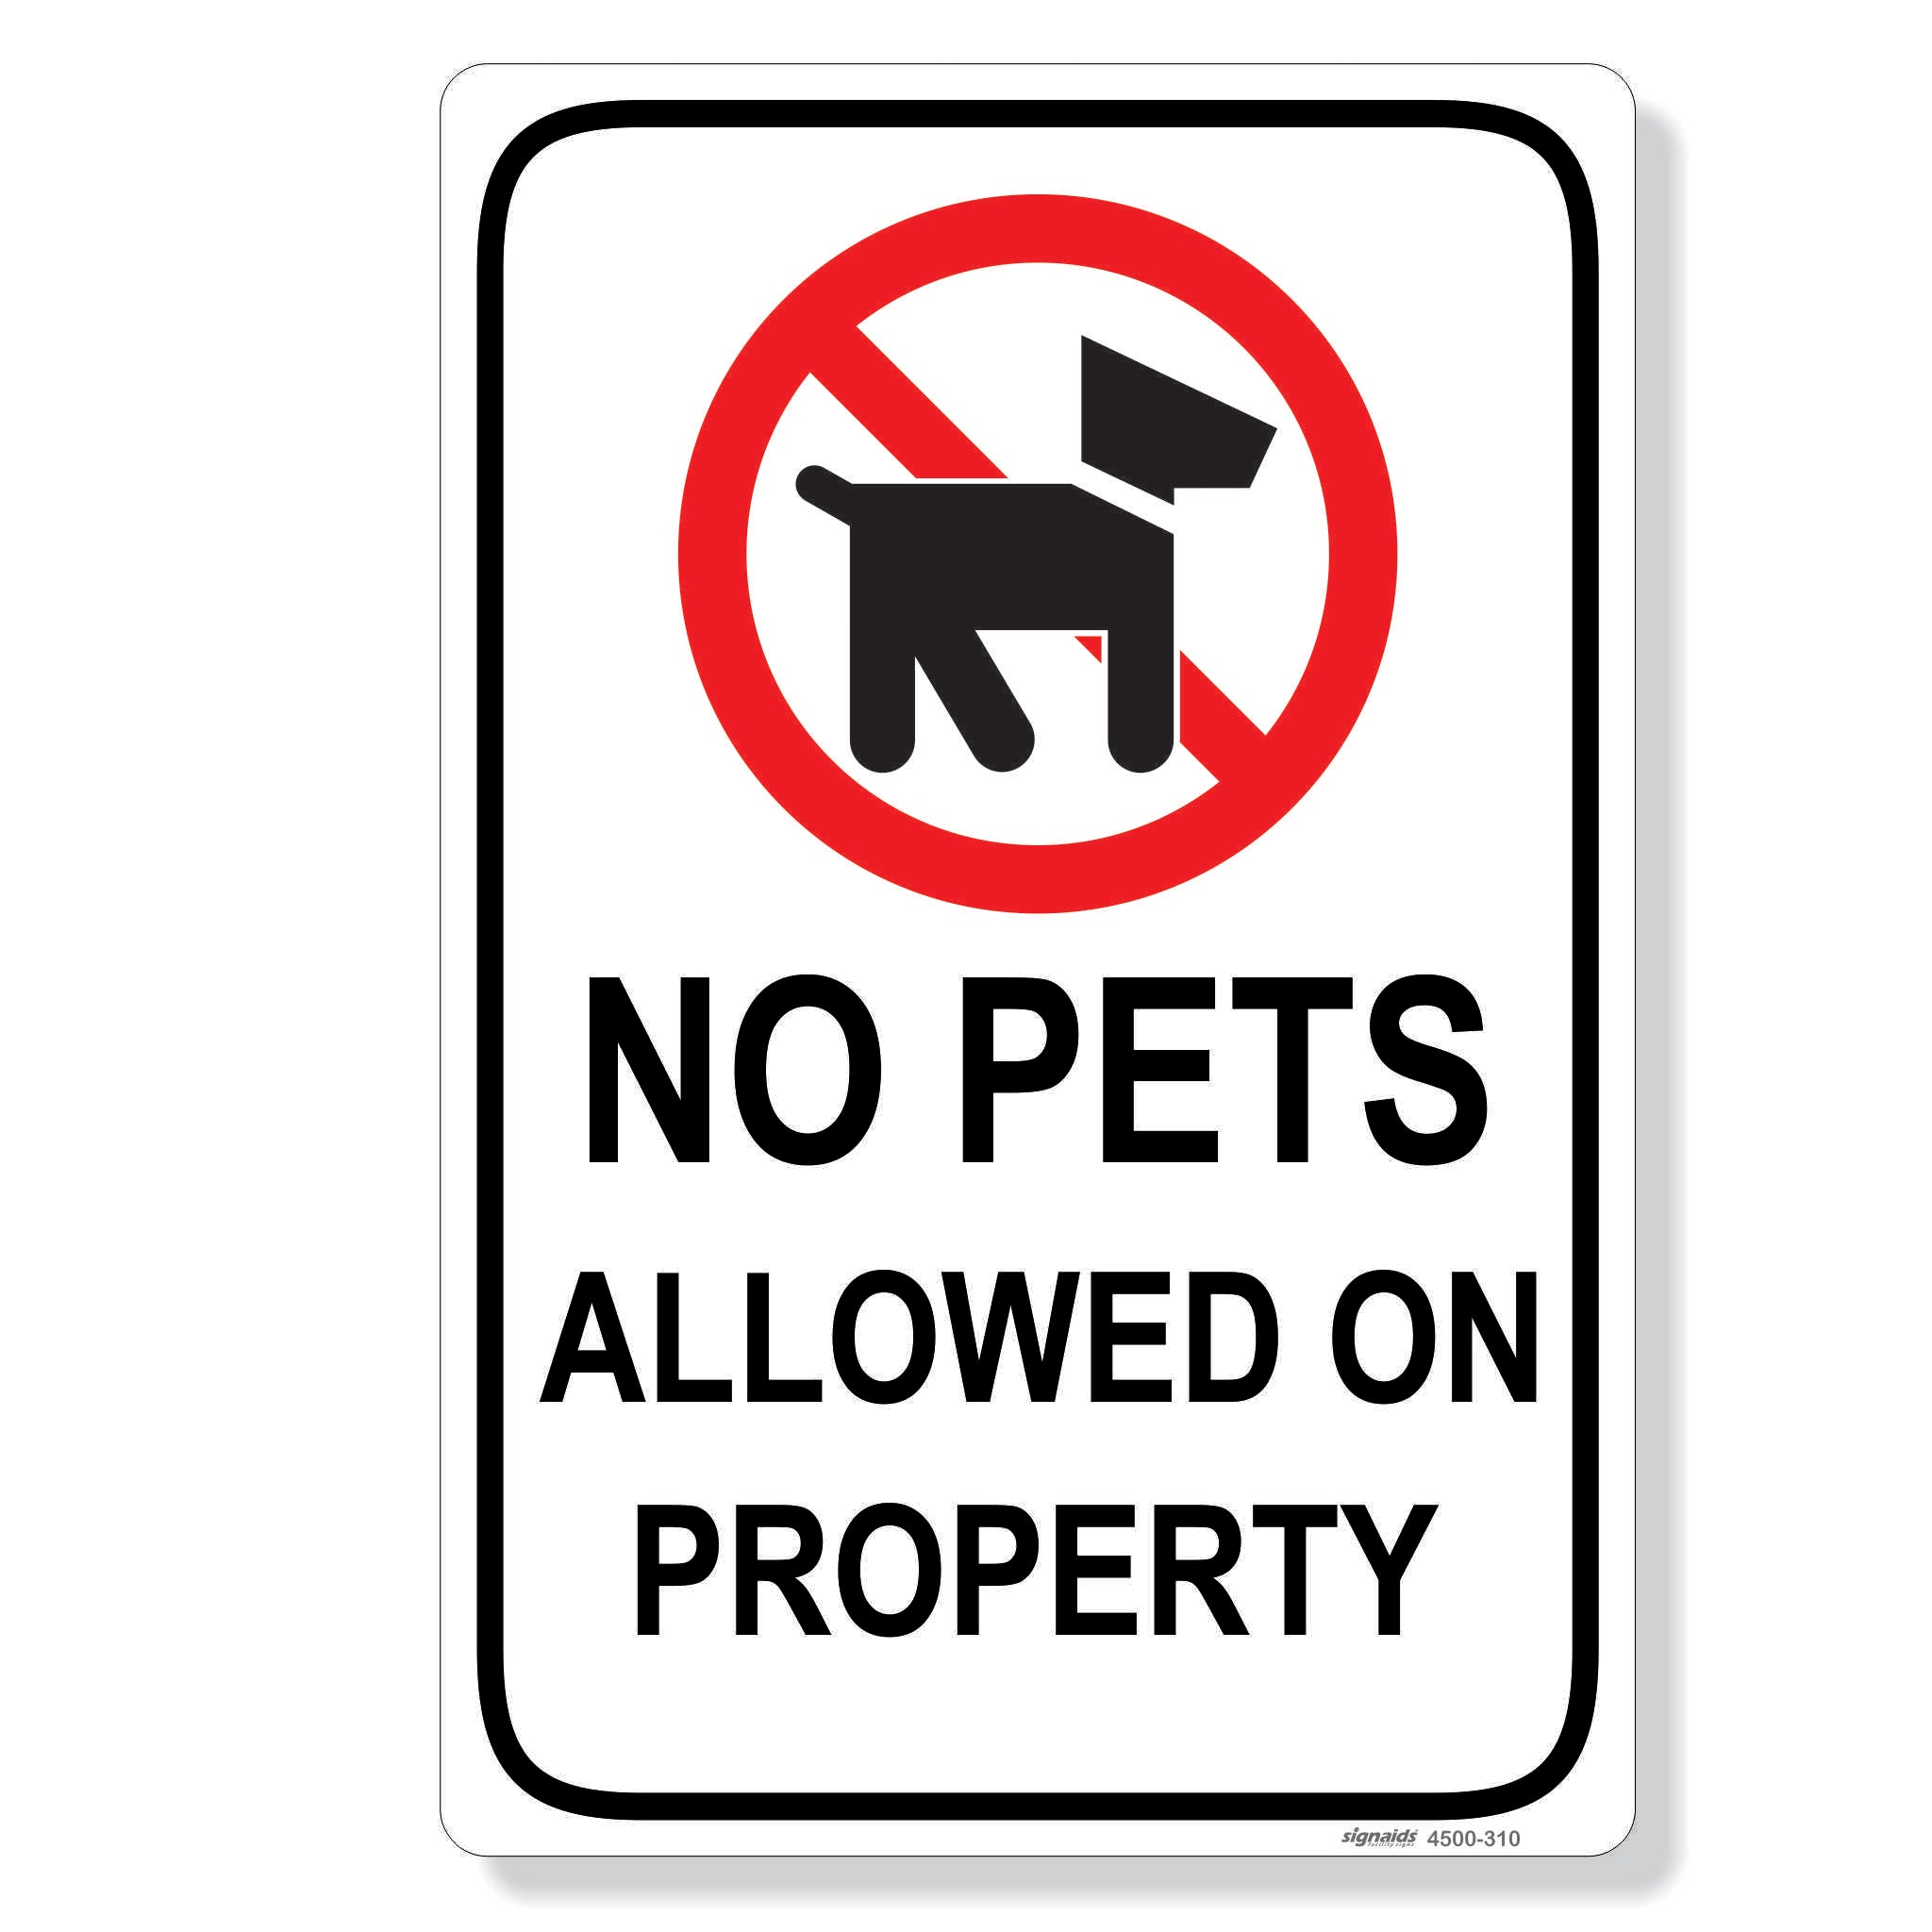 12 x 18 NO PETS ALLOWED ON PROPERTY